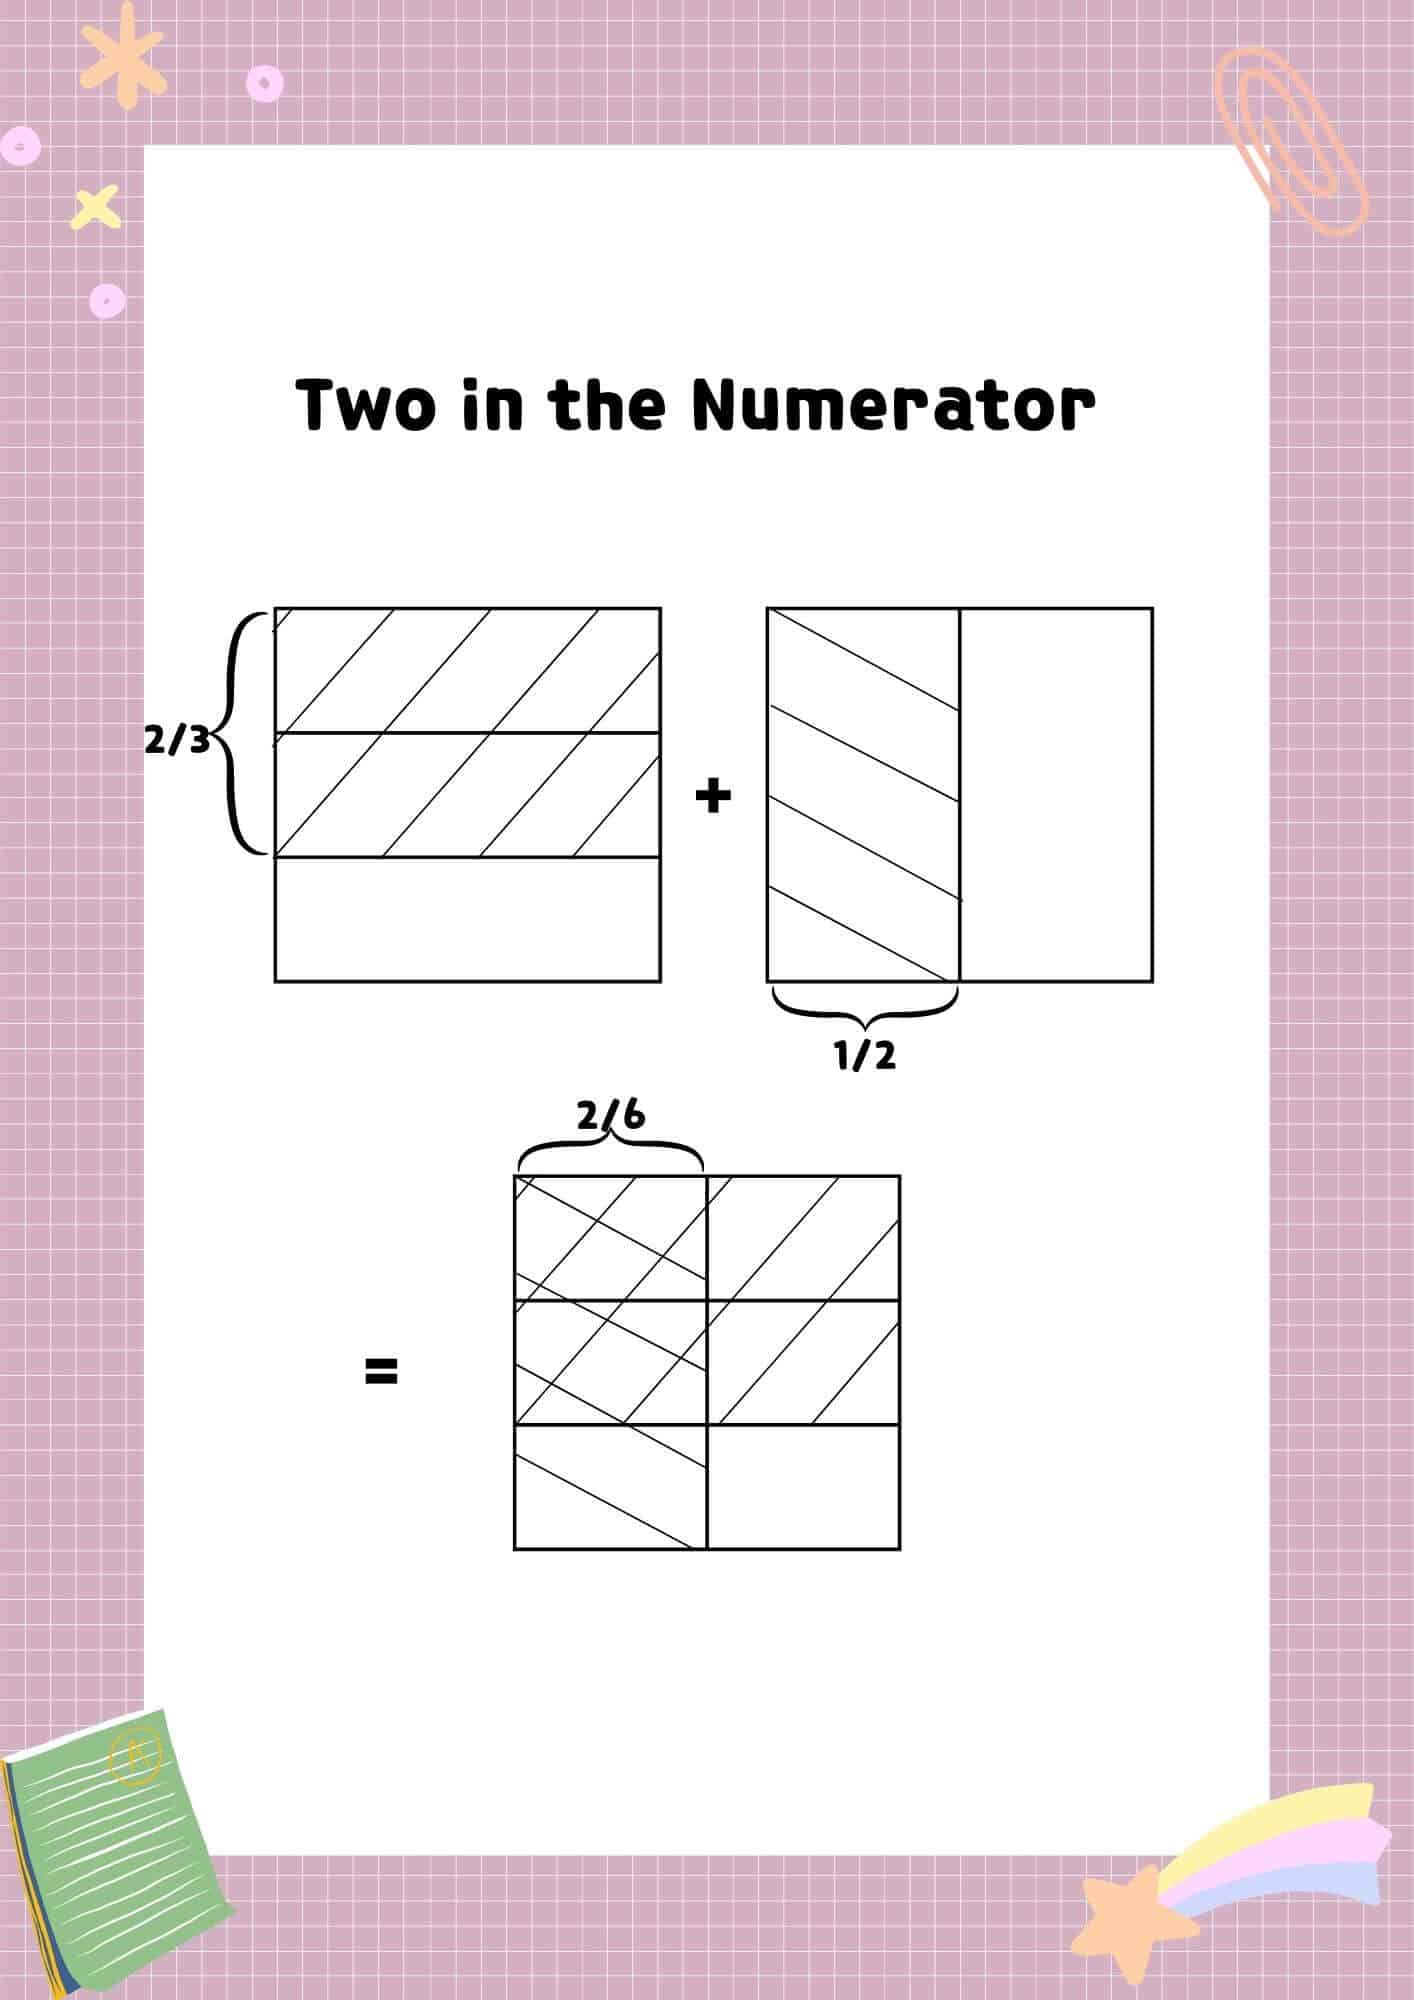 representation of multiplying fractions using arrays whe 2 in the numerator